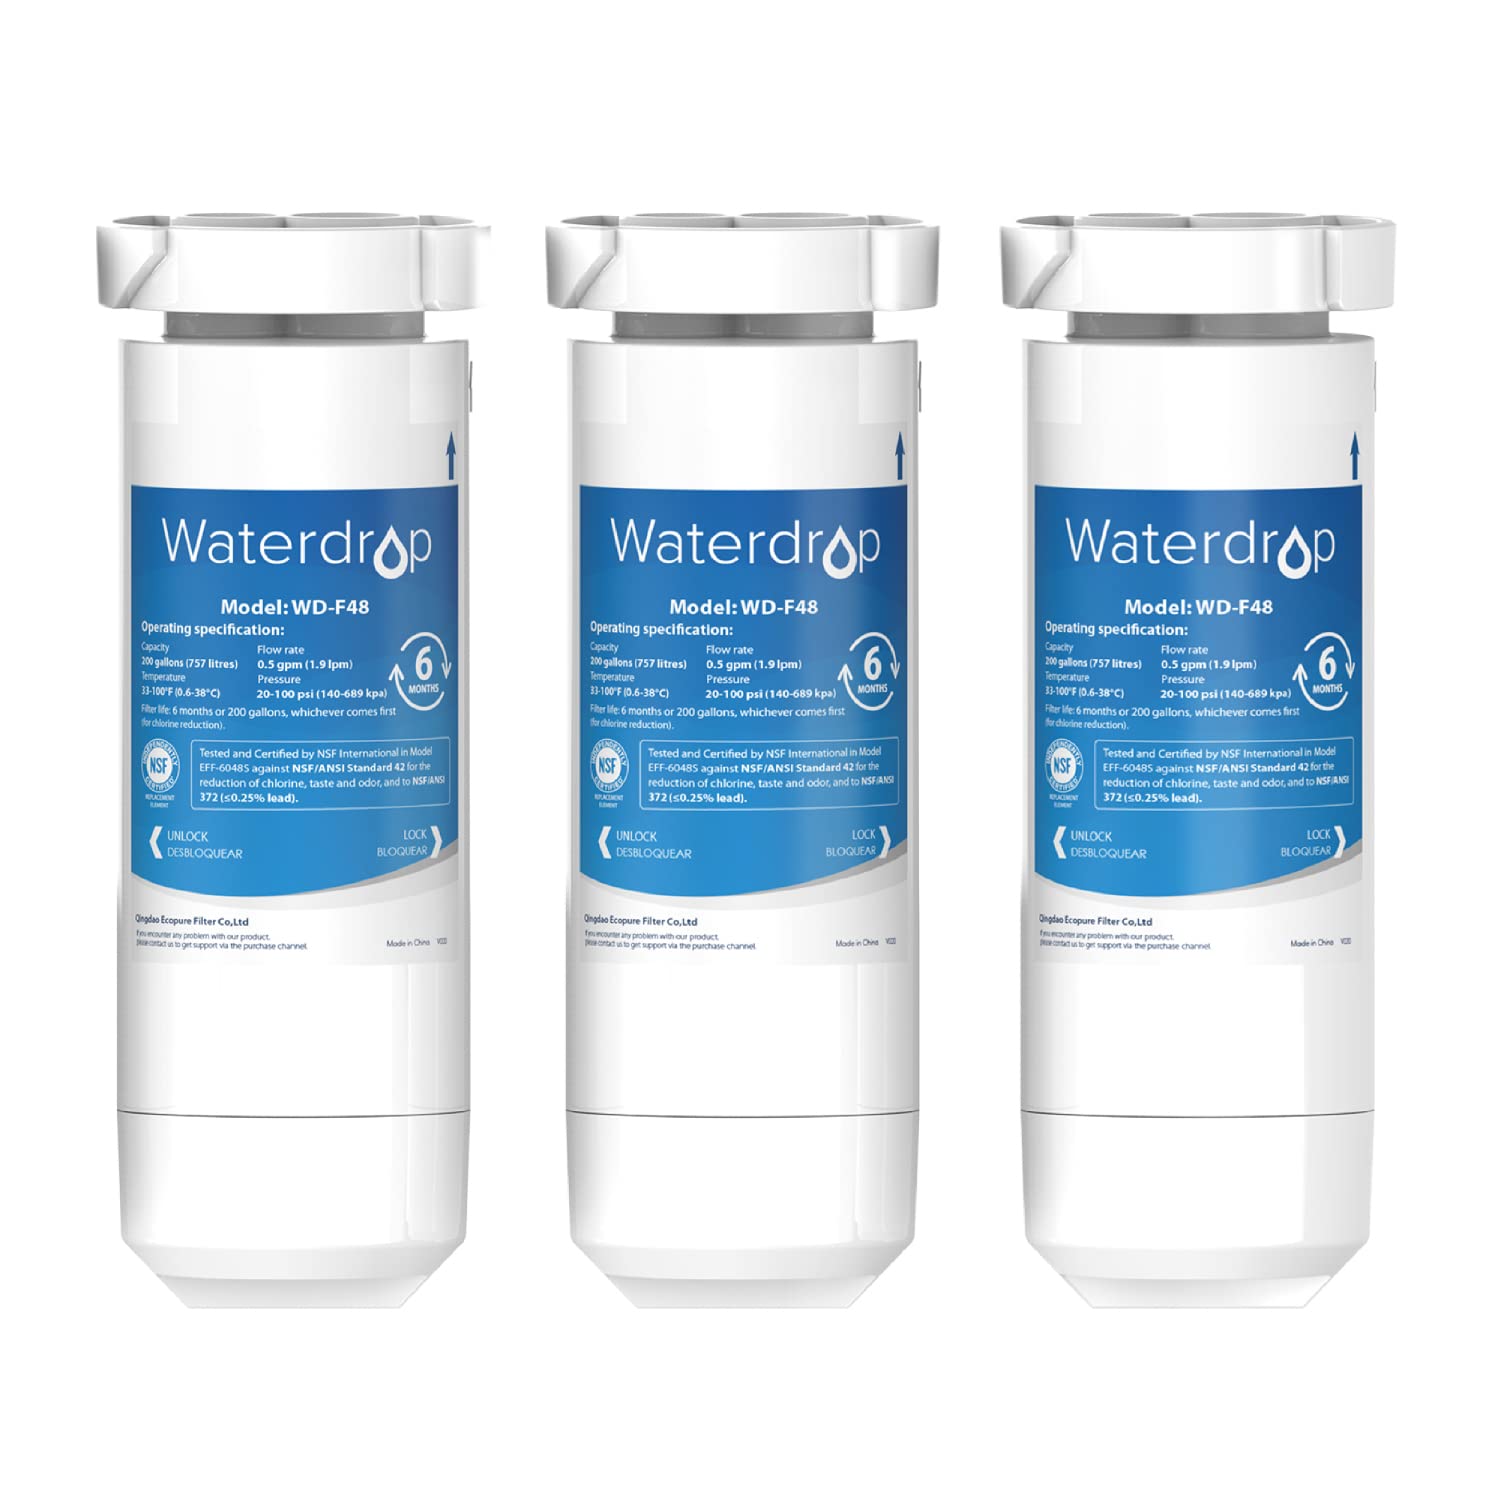 Waterdrop XWF water filter for GE® refrigerator, Replacement filter, 3 Filters